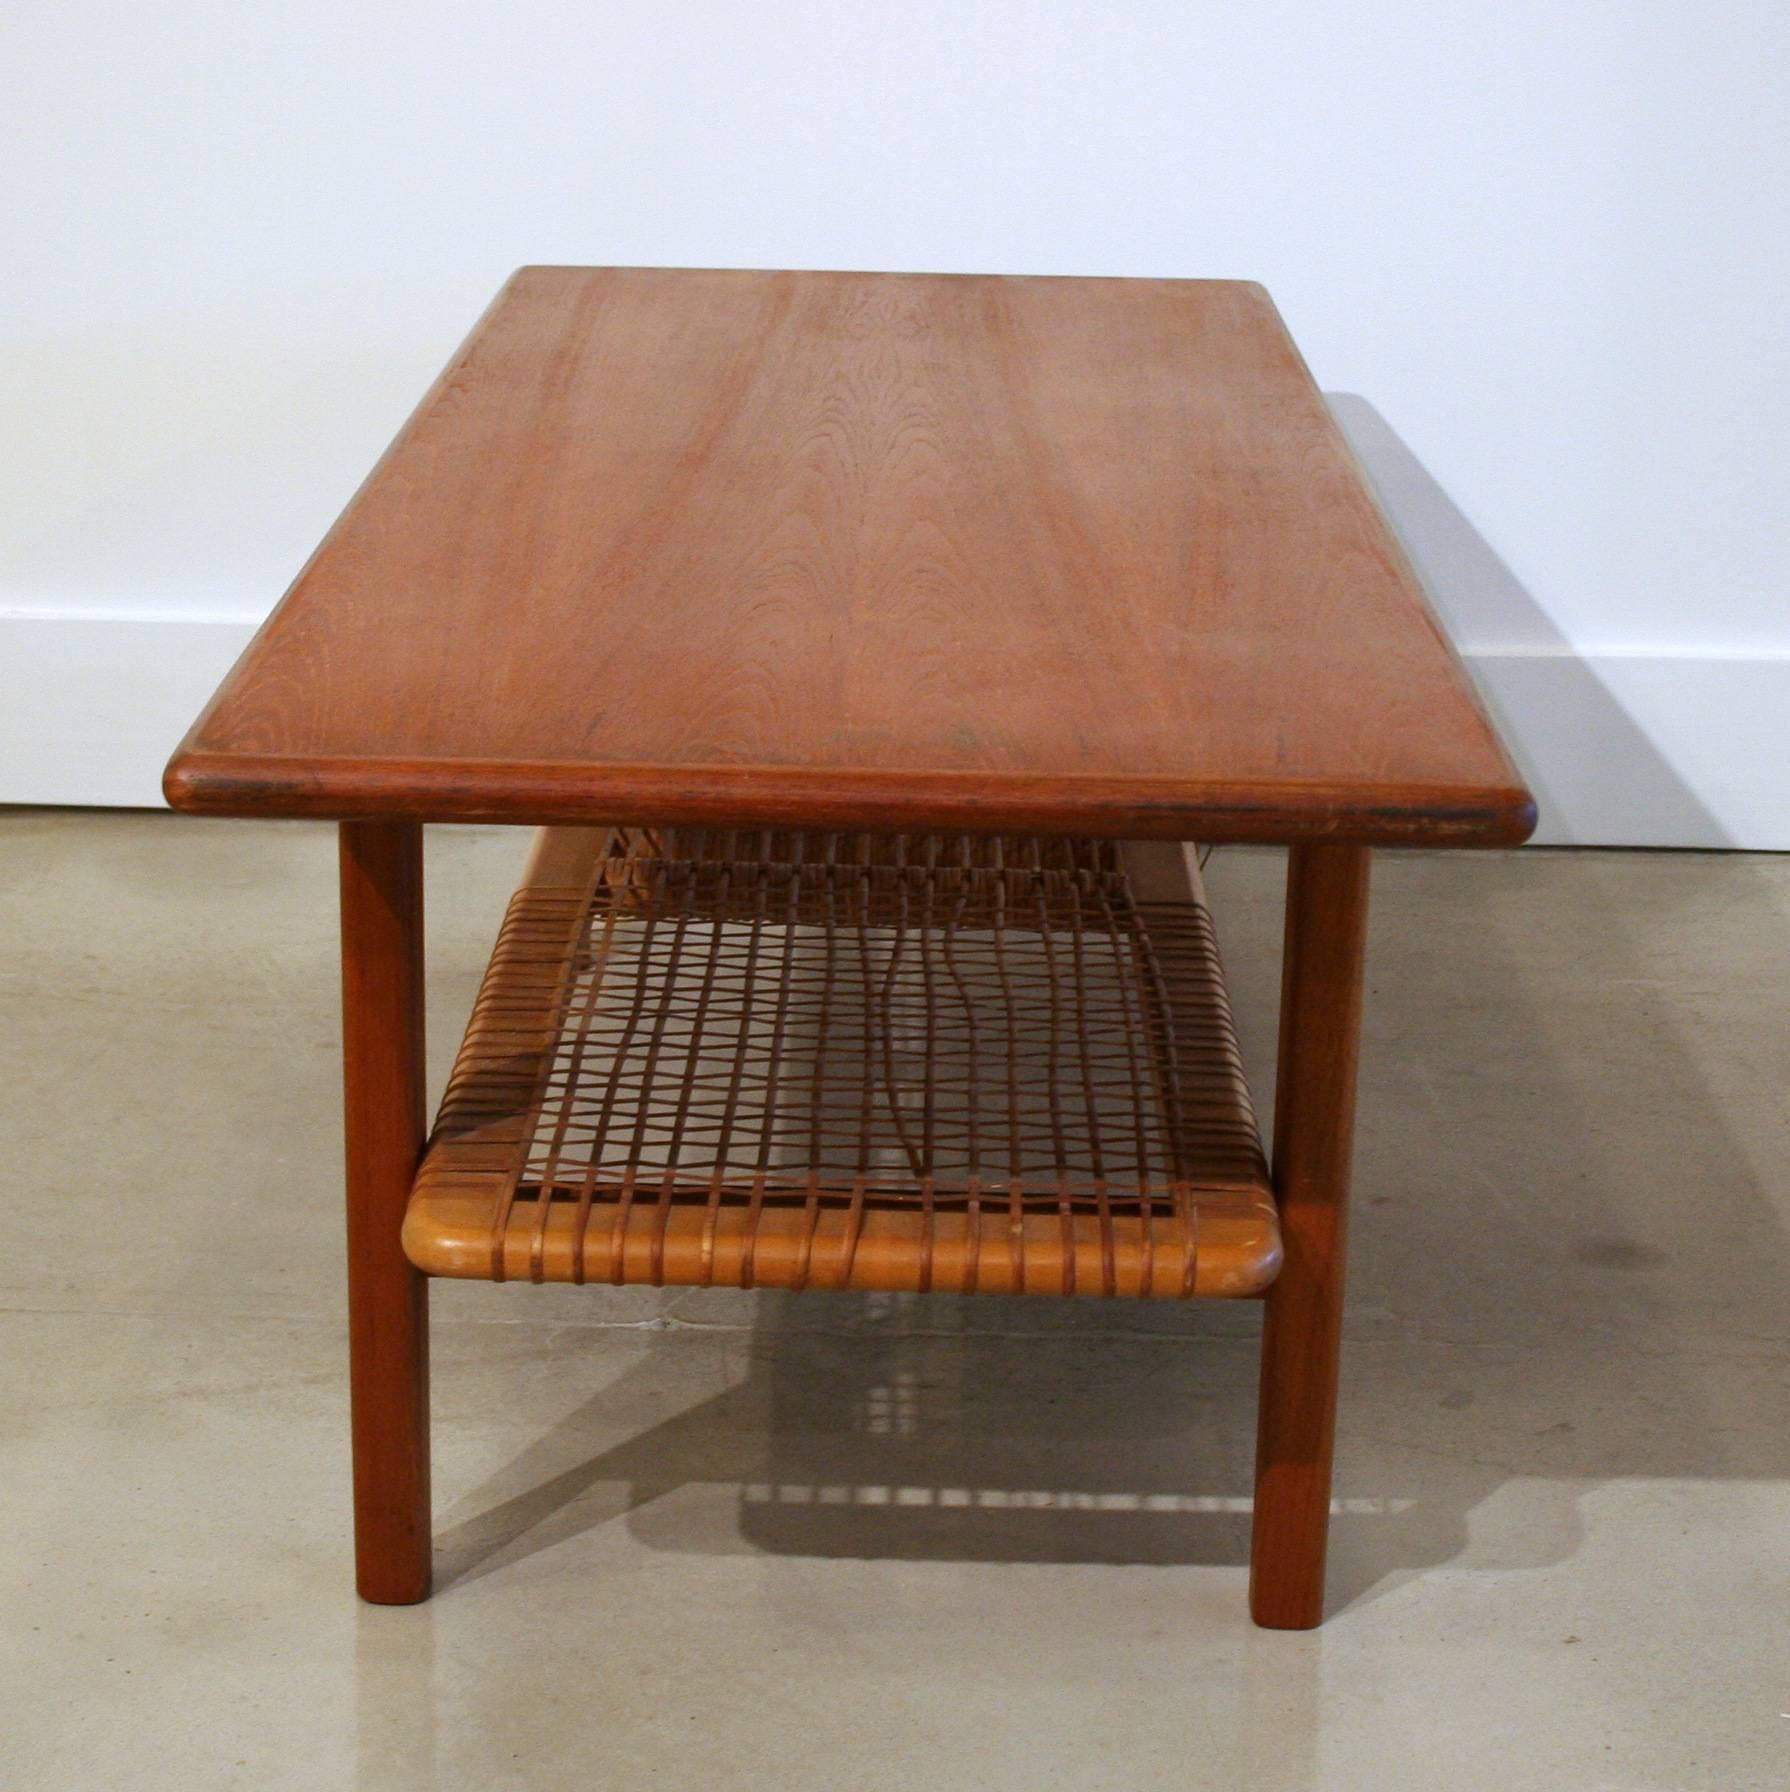 Solid teak coffee table with rounded edges and a lower shelf with caning. Sleek, and simple, full of mid-century character.